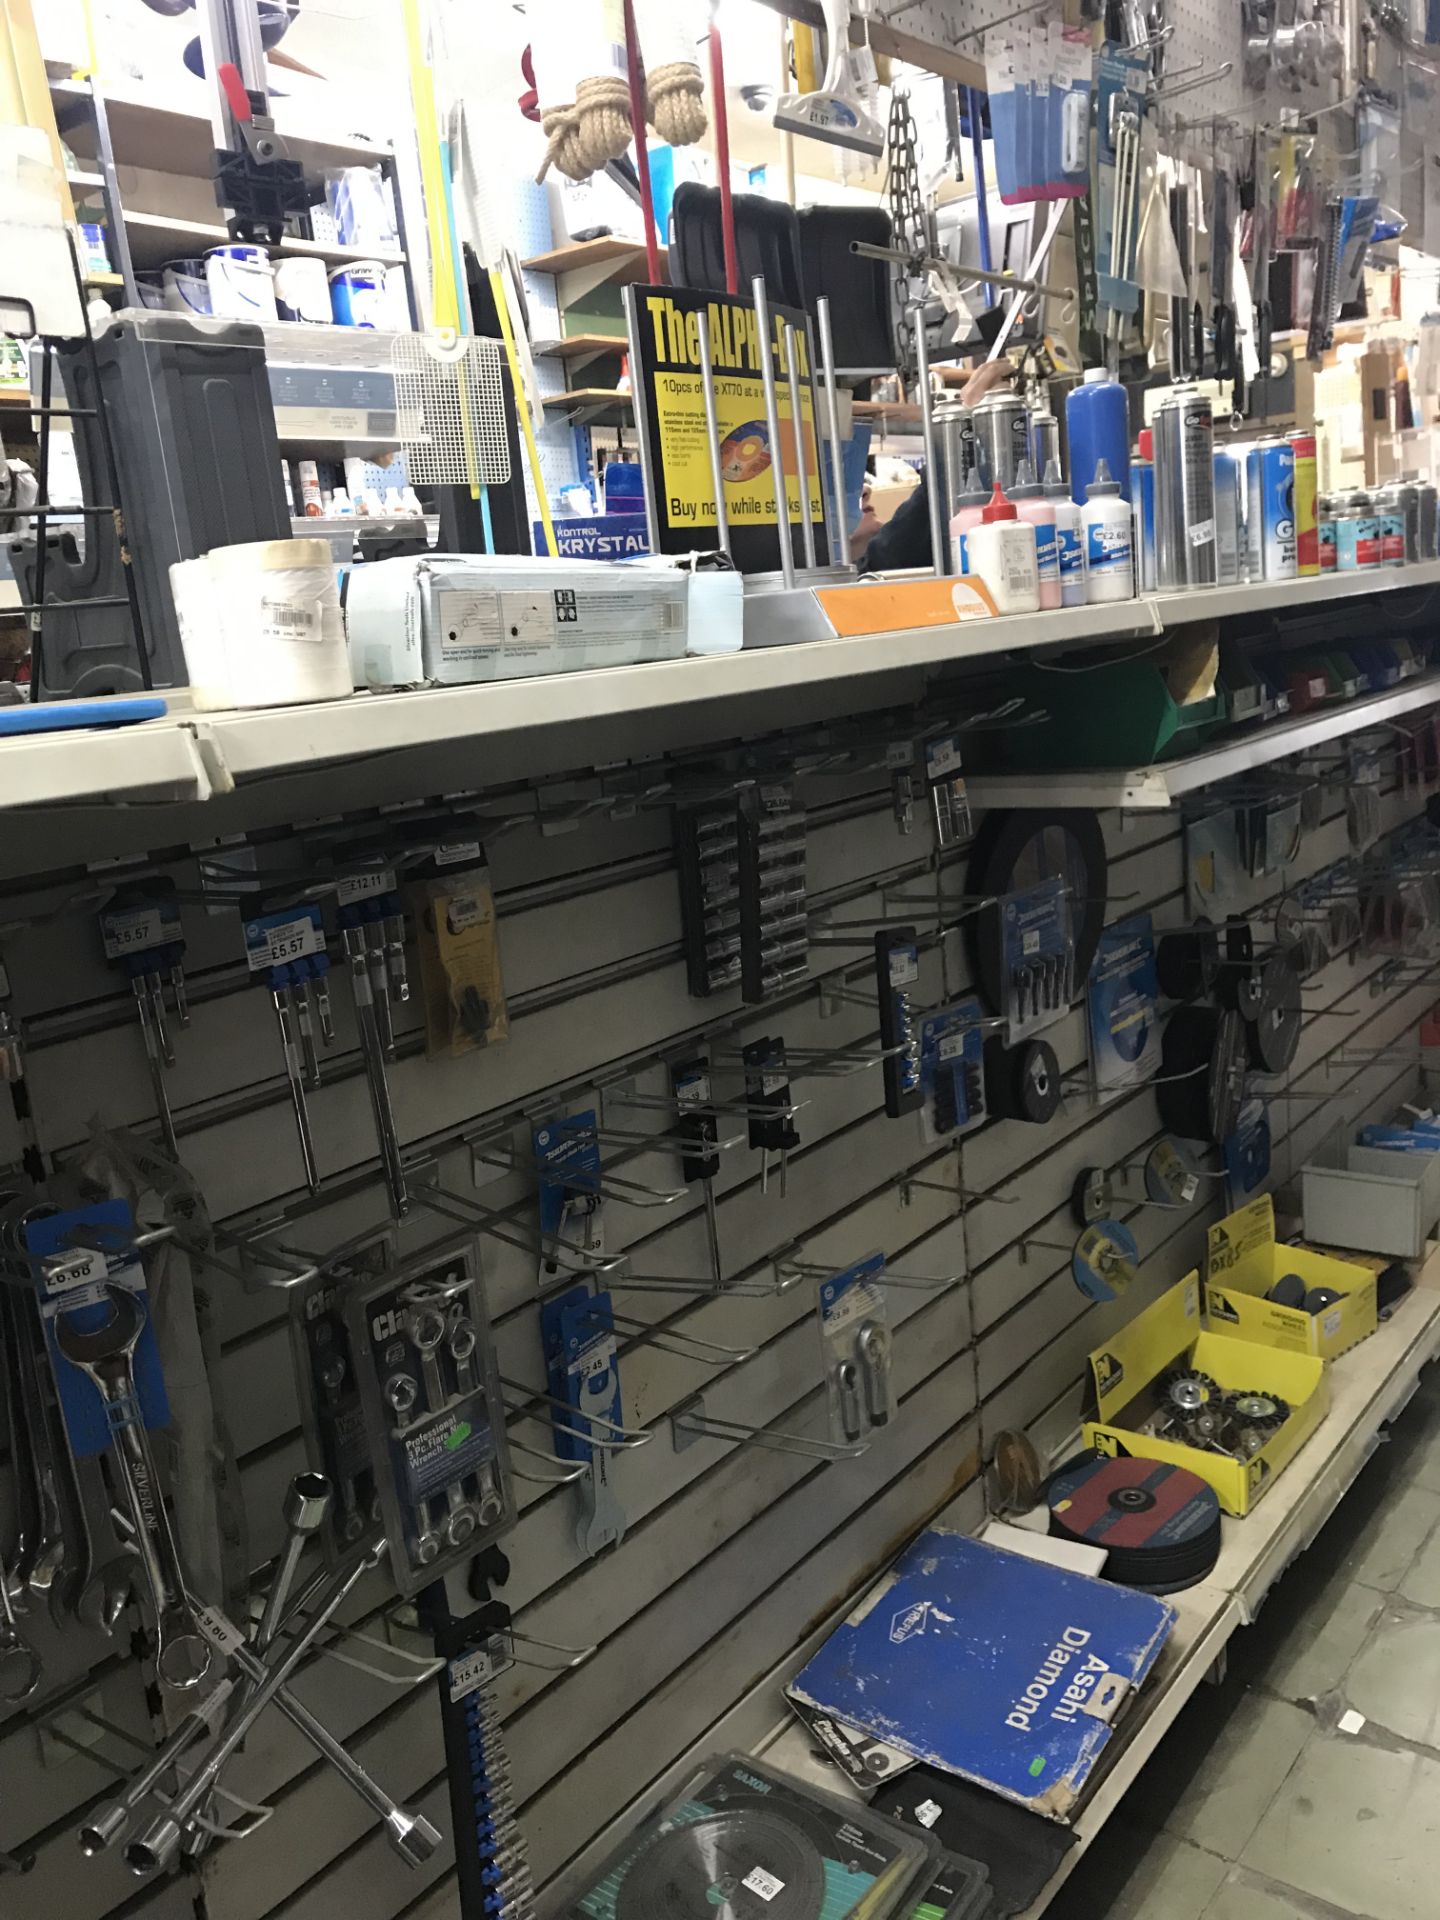 Entire contents of hardware store, all stock, racking and equipment. - Image 64 of 94